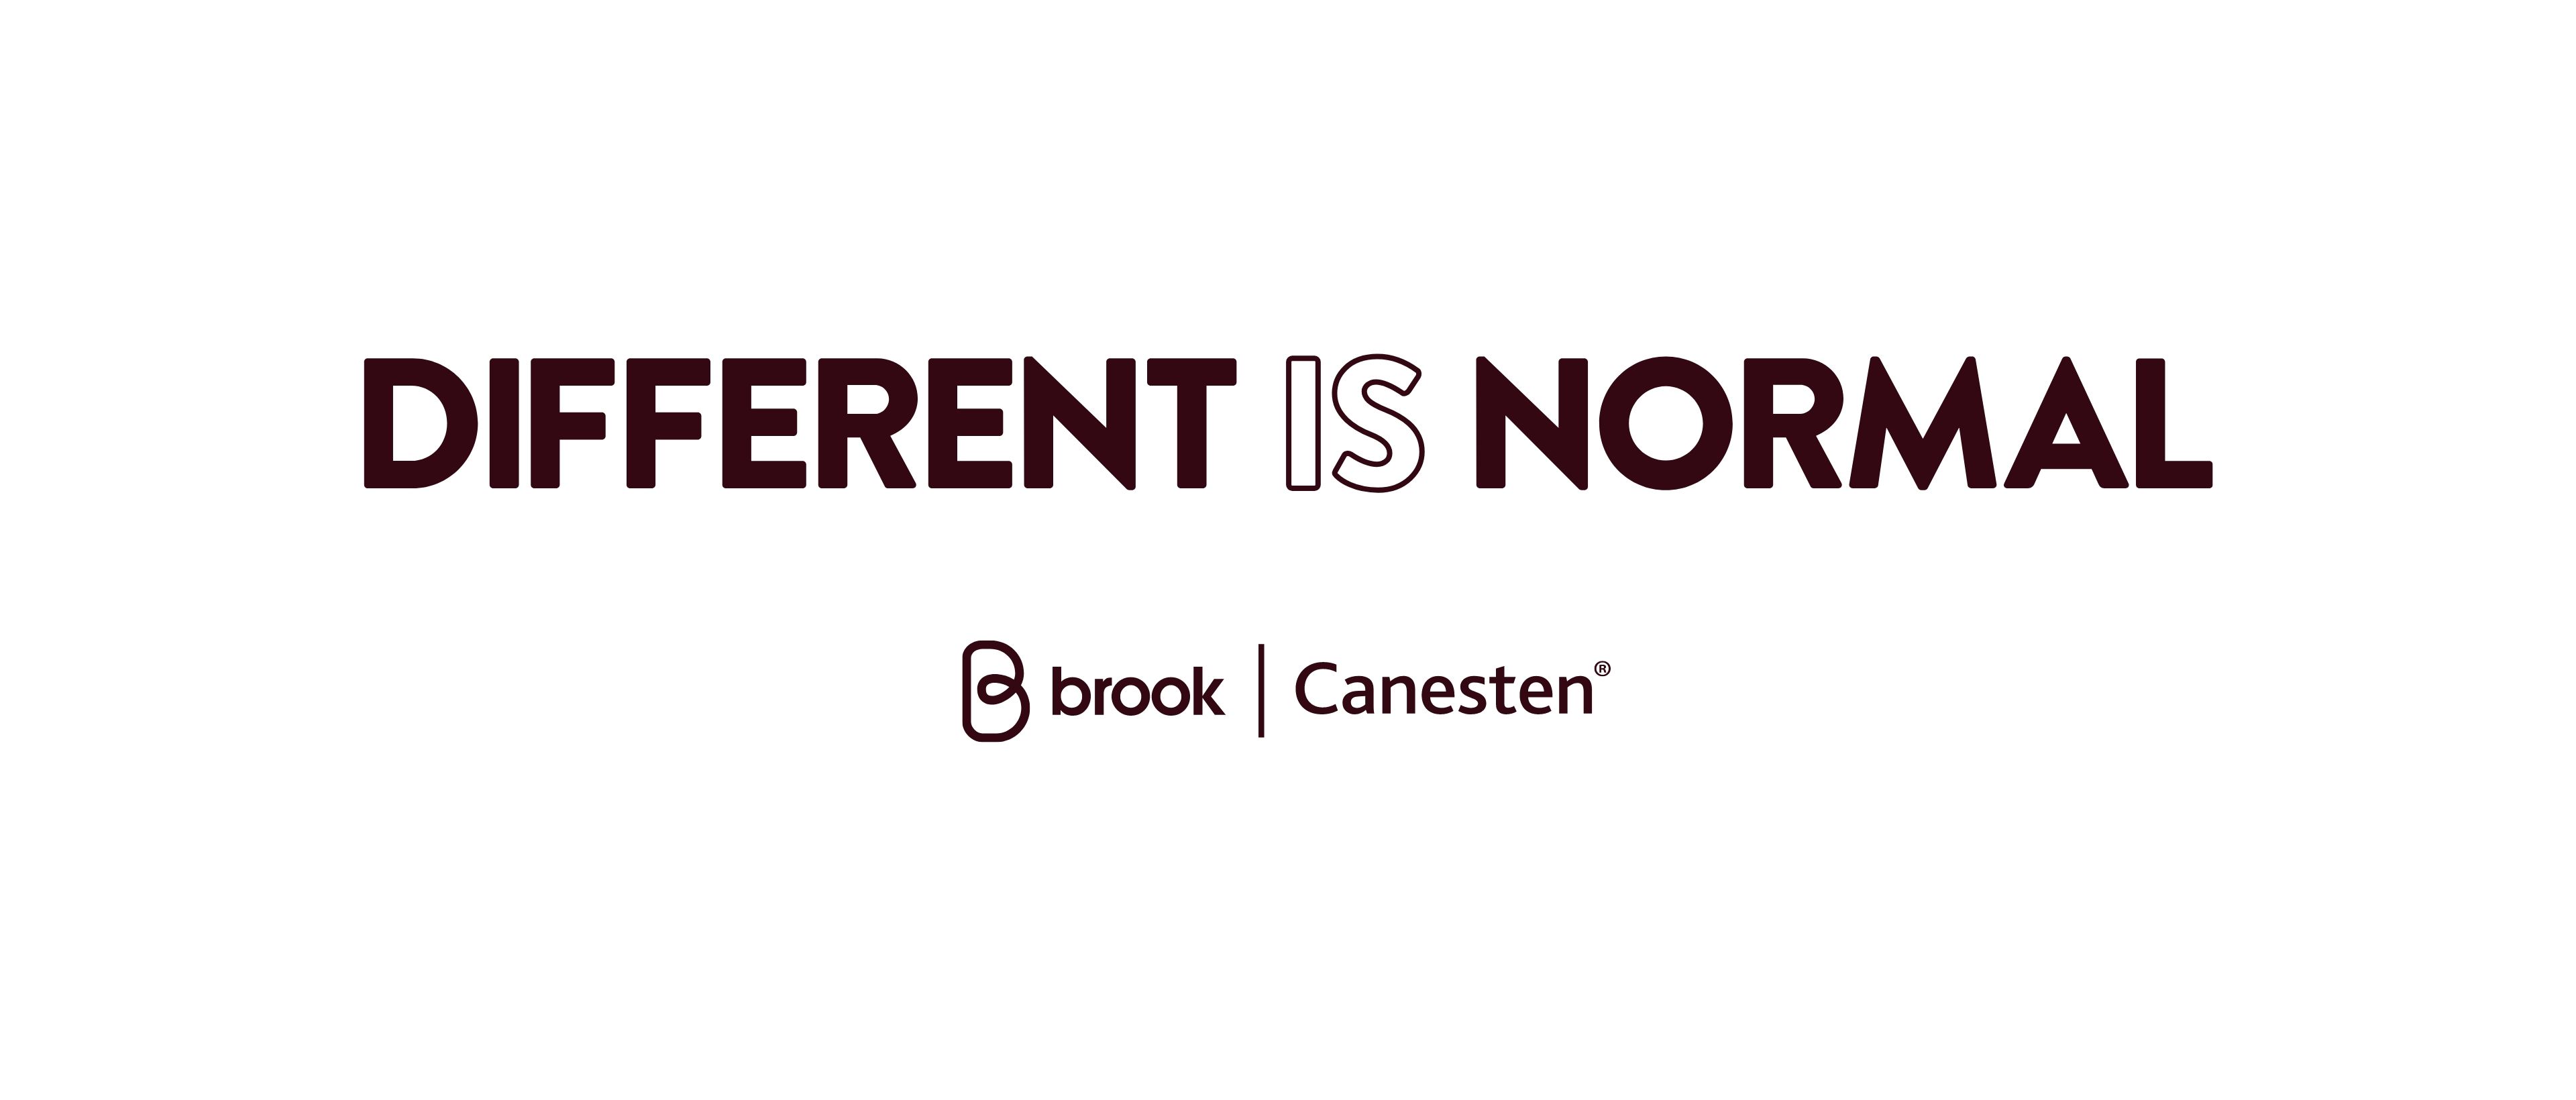 Different is normal logo